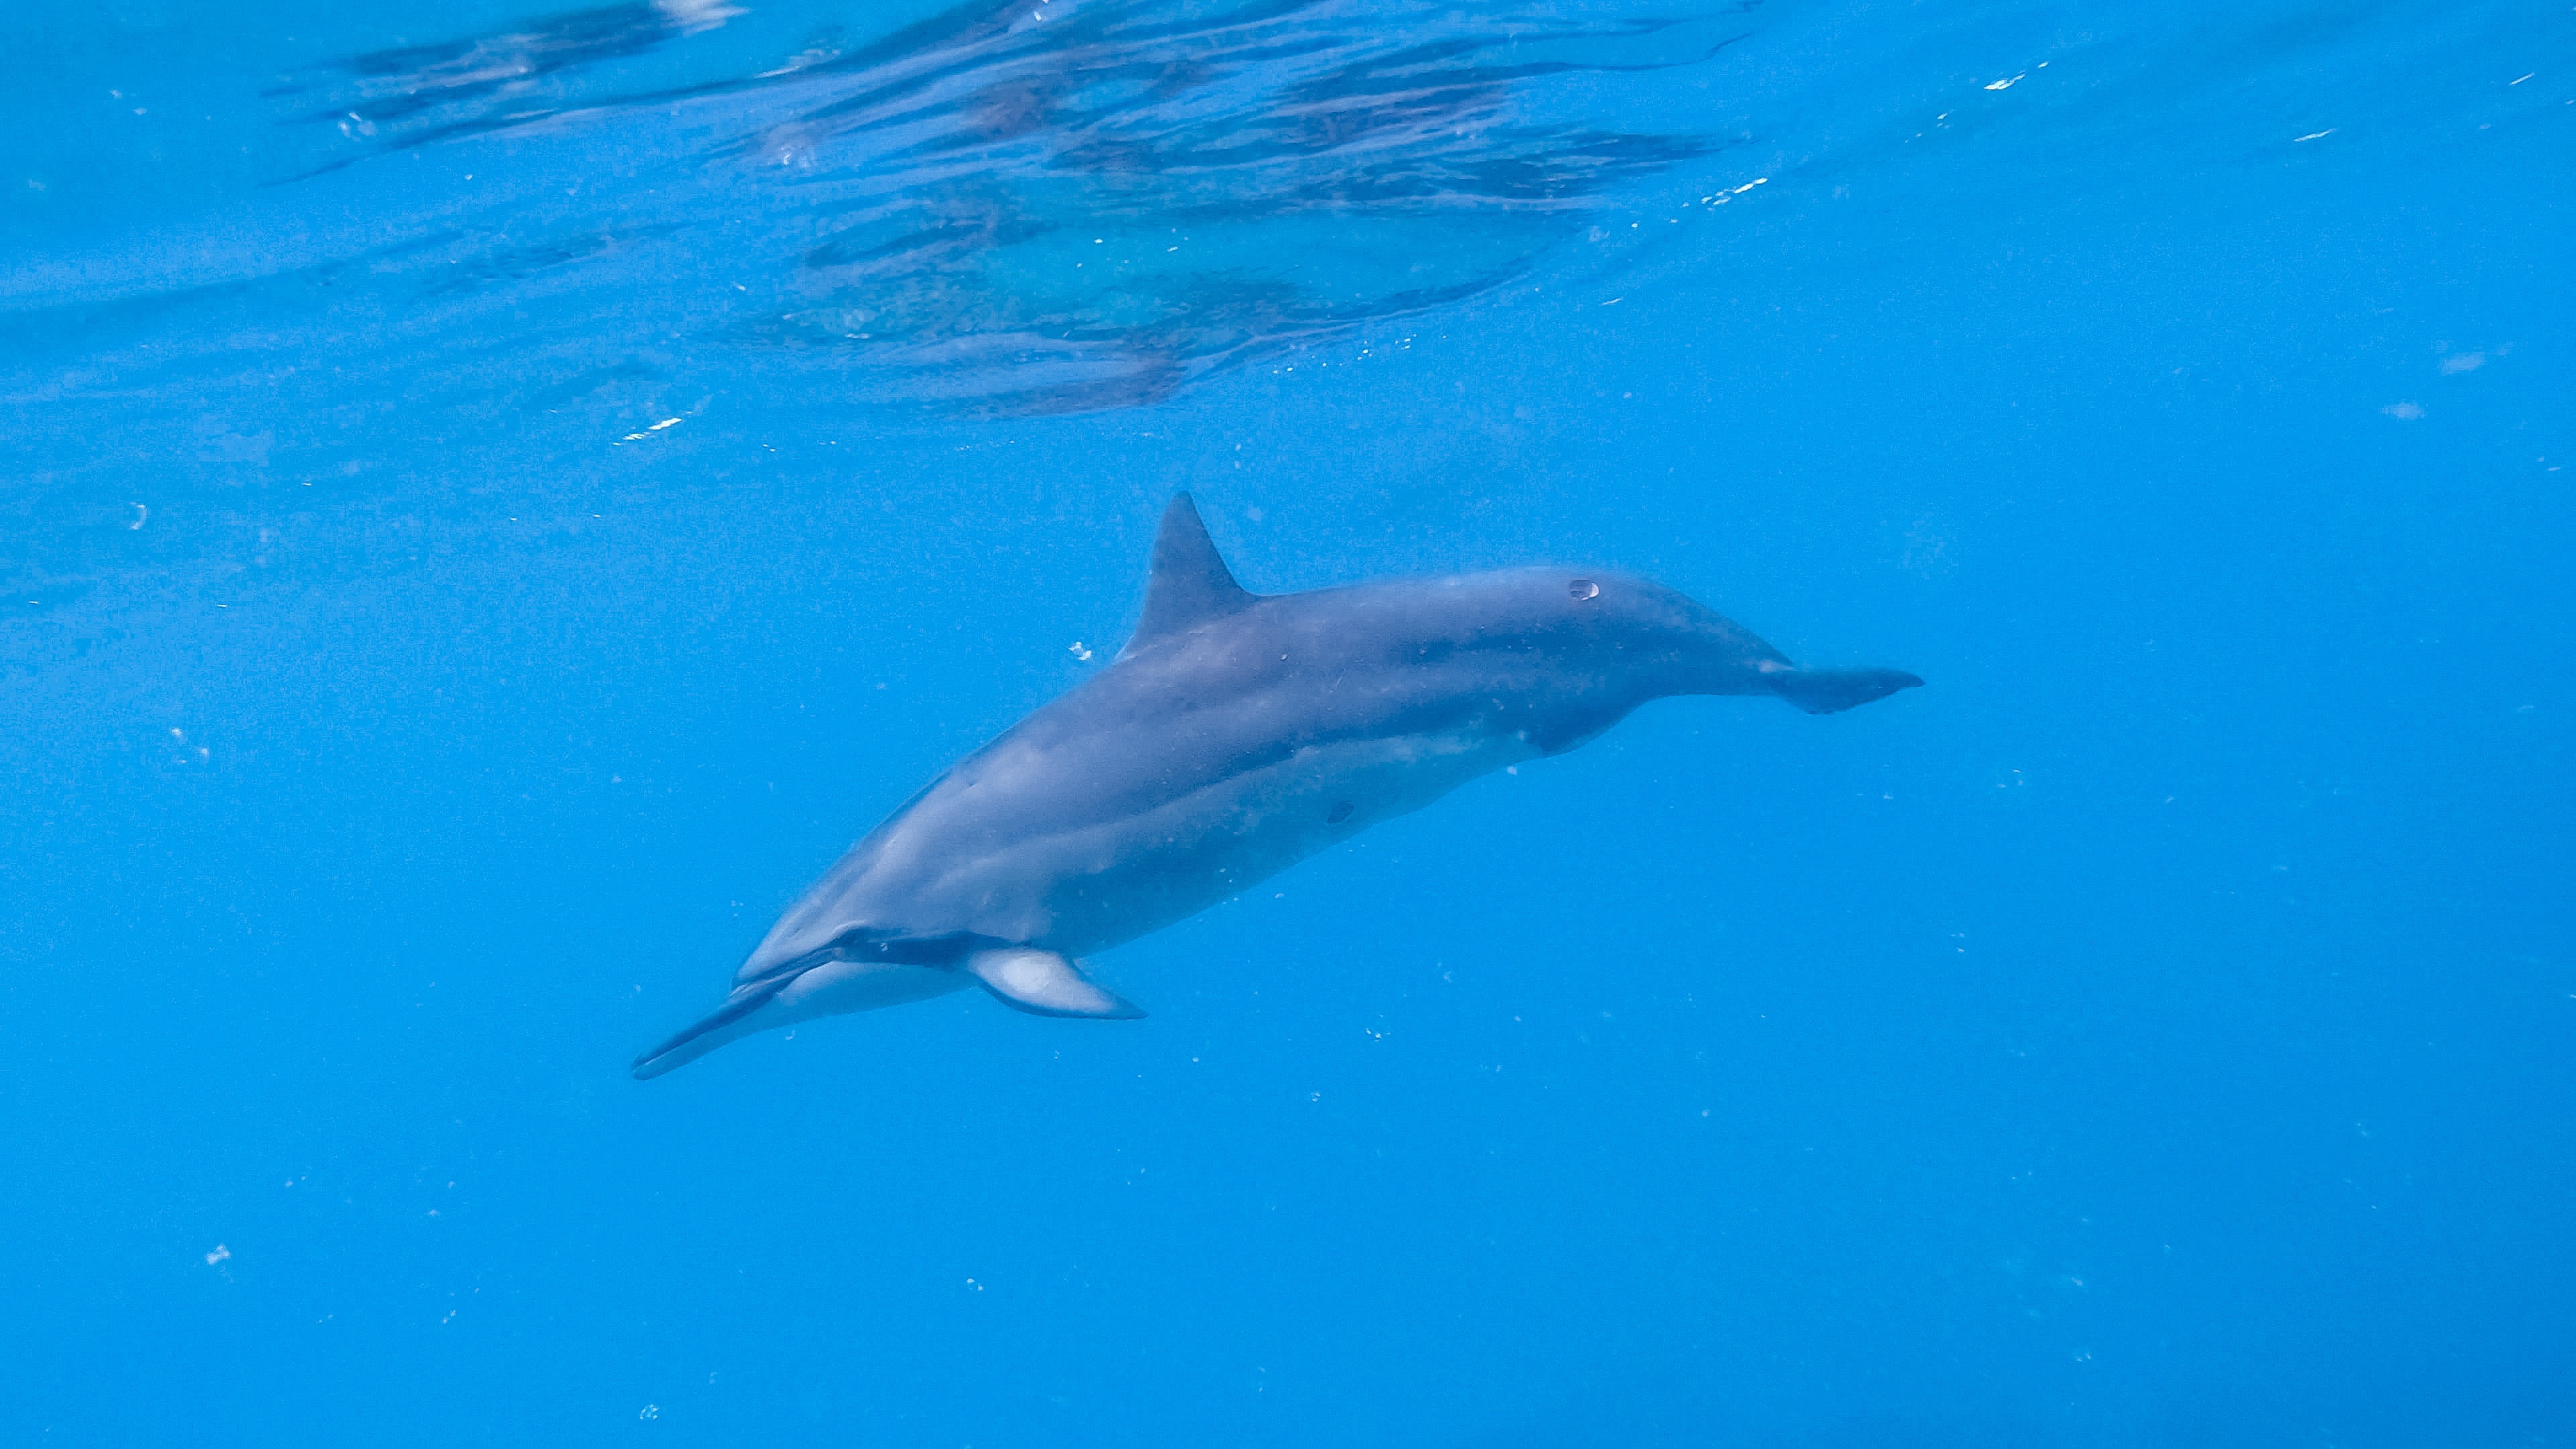 And here is that dolphin again! This same dolphin kept coming back.